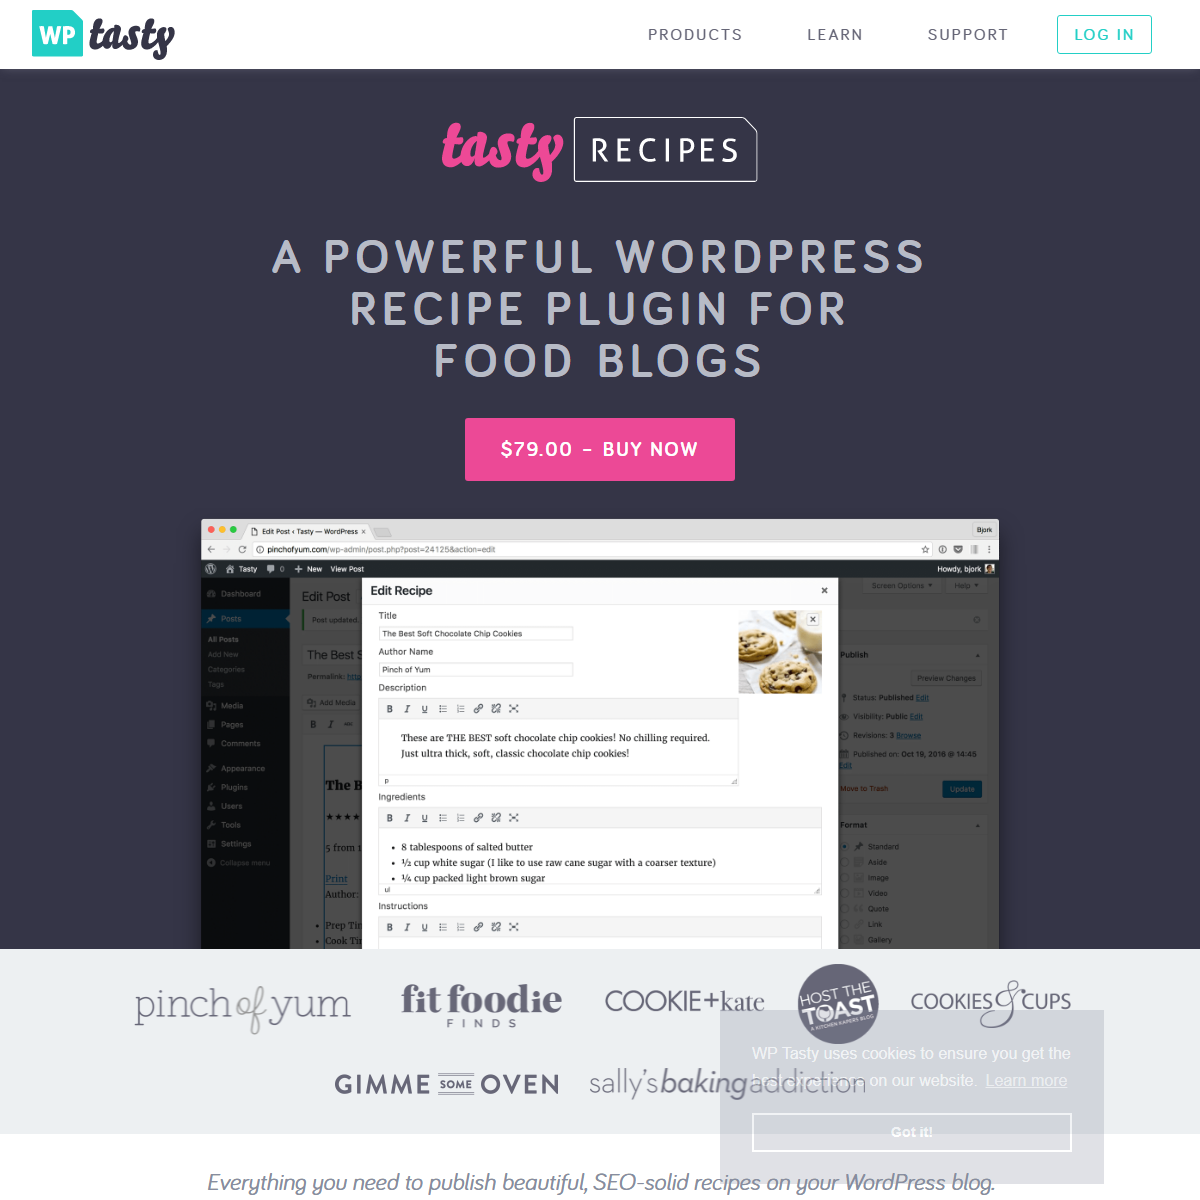 A complete backup of https://www.wptasty.com/tasty-recipes